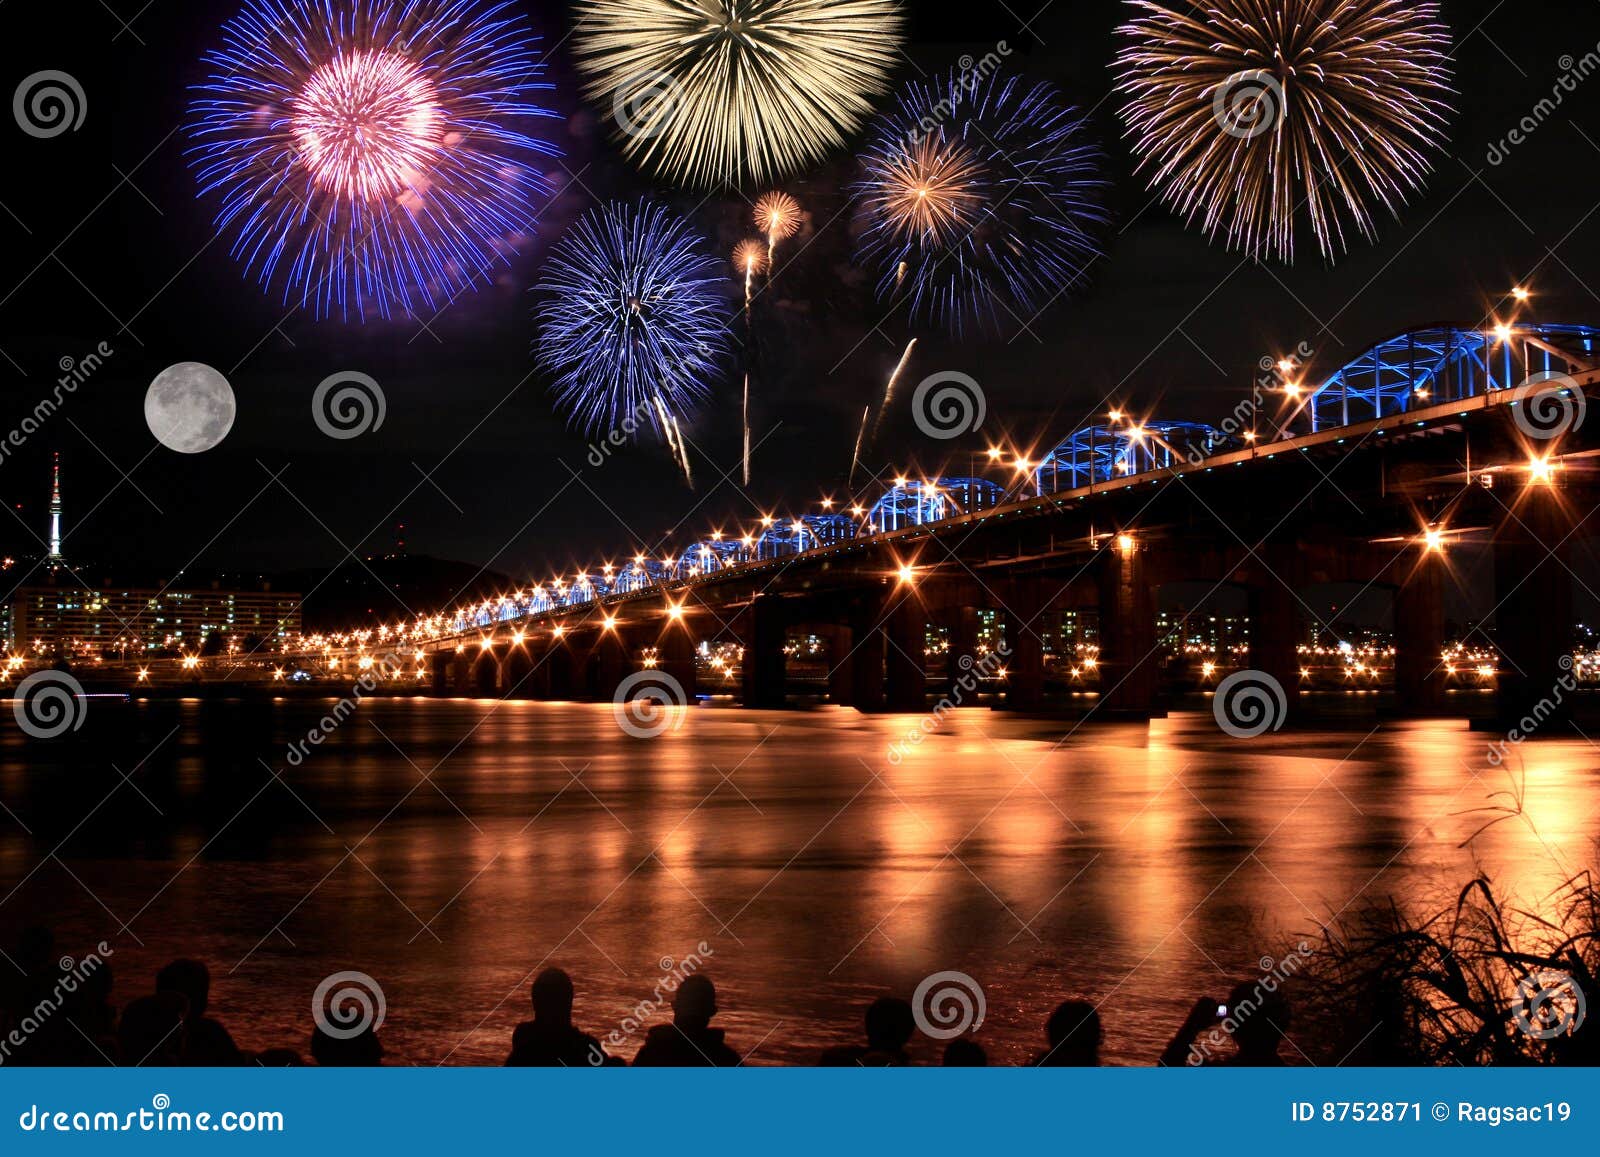 spectacular fireworks at han river in full moon